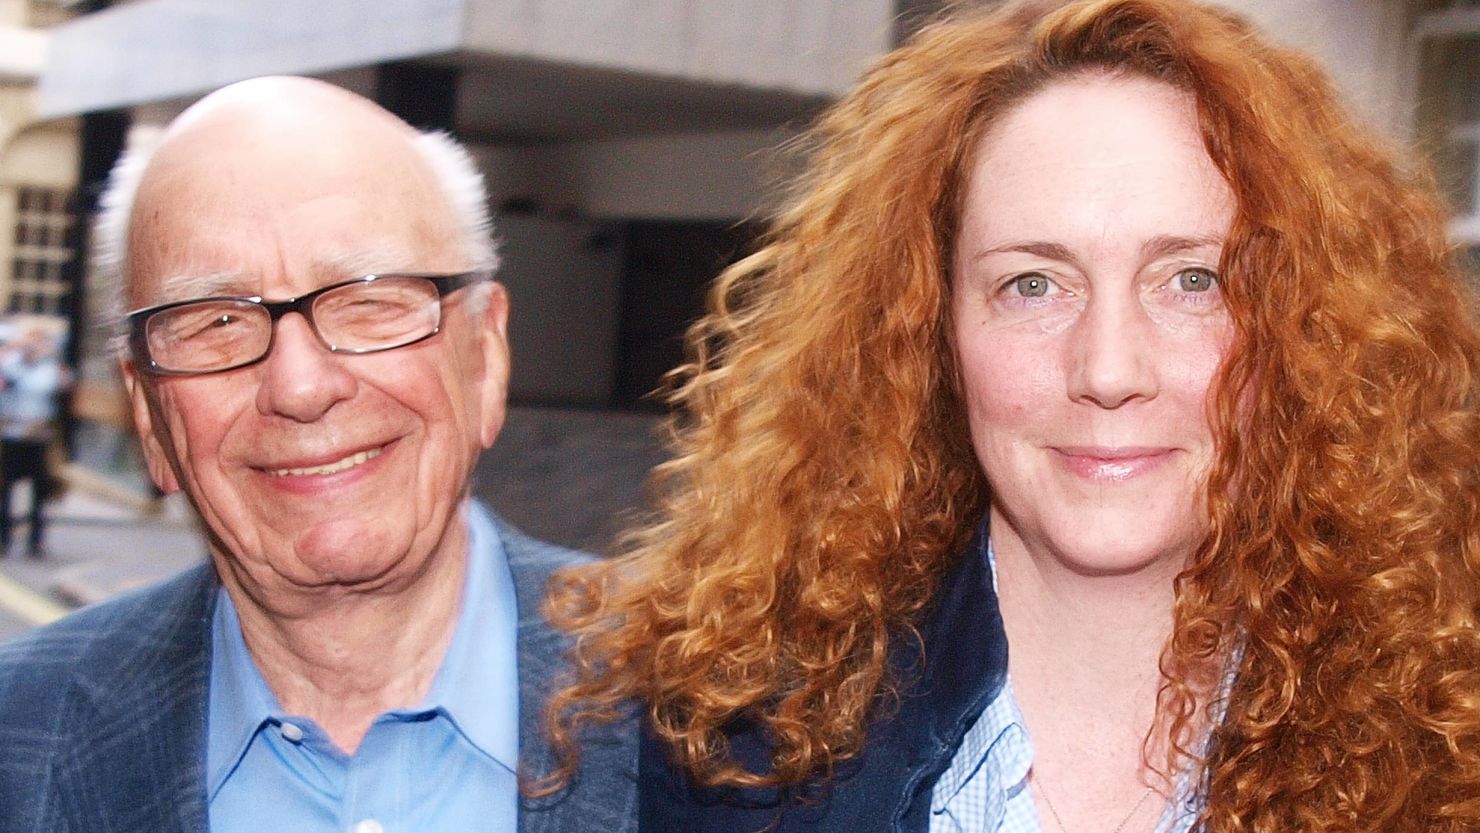 Rebekah Brooks, seen here with Rupert Murdoch, has been arrested but not charged over the police bribery probe.